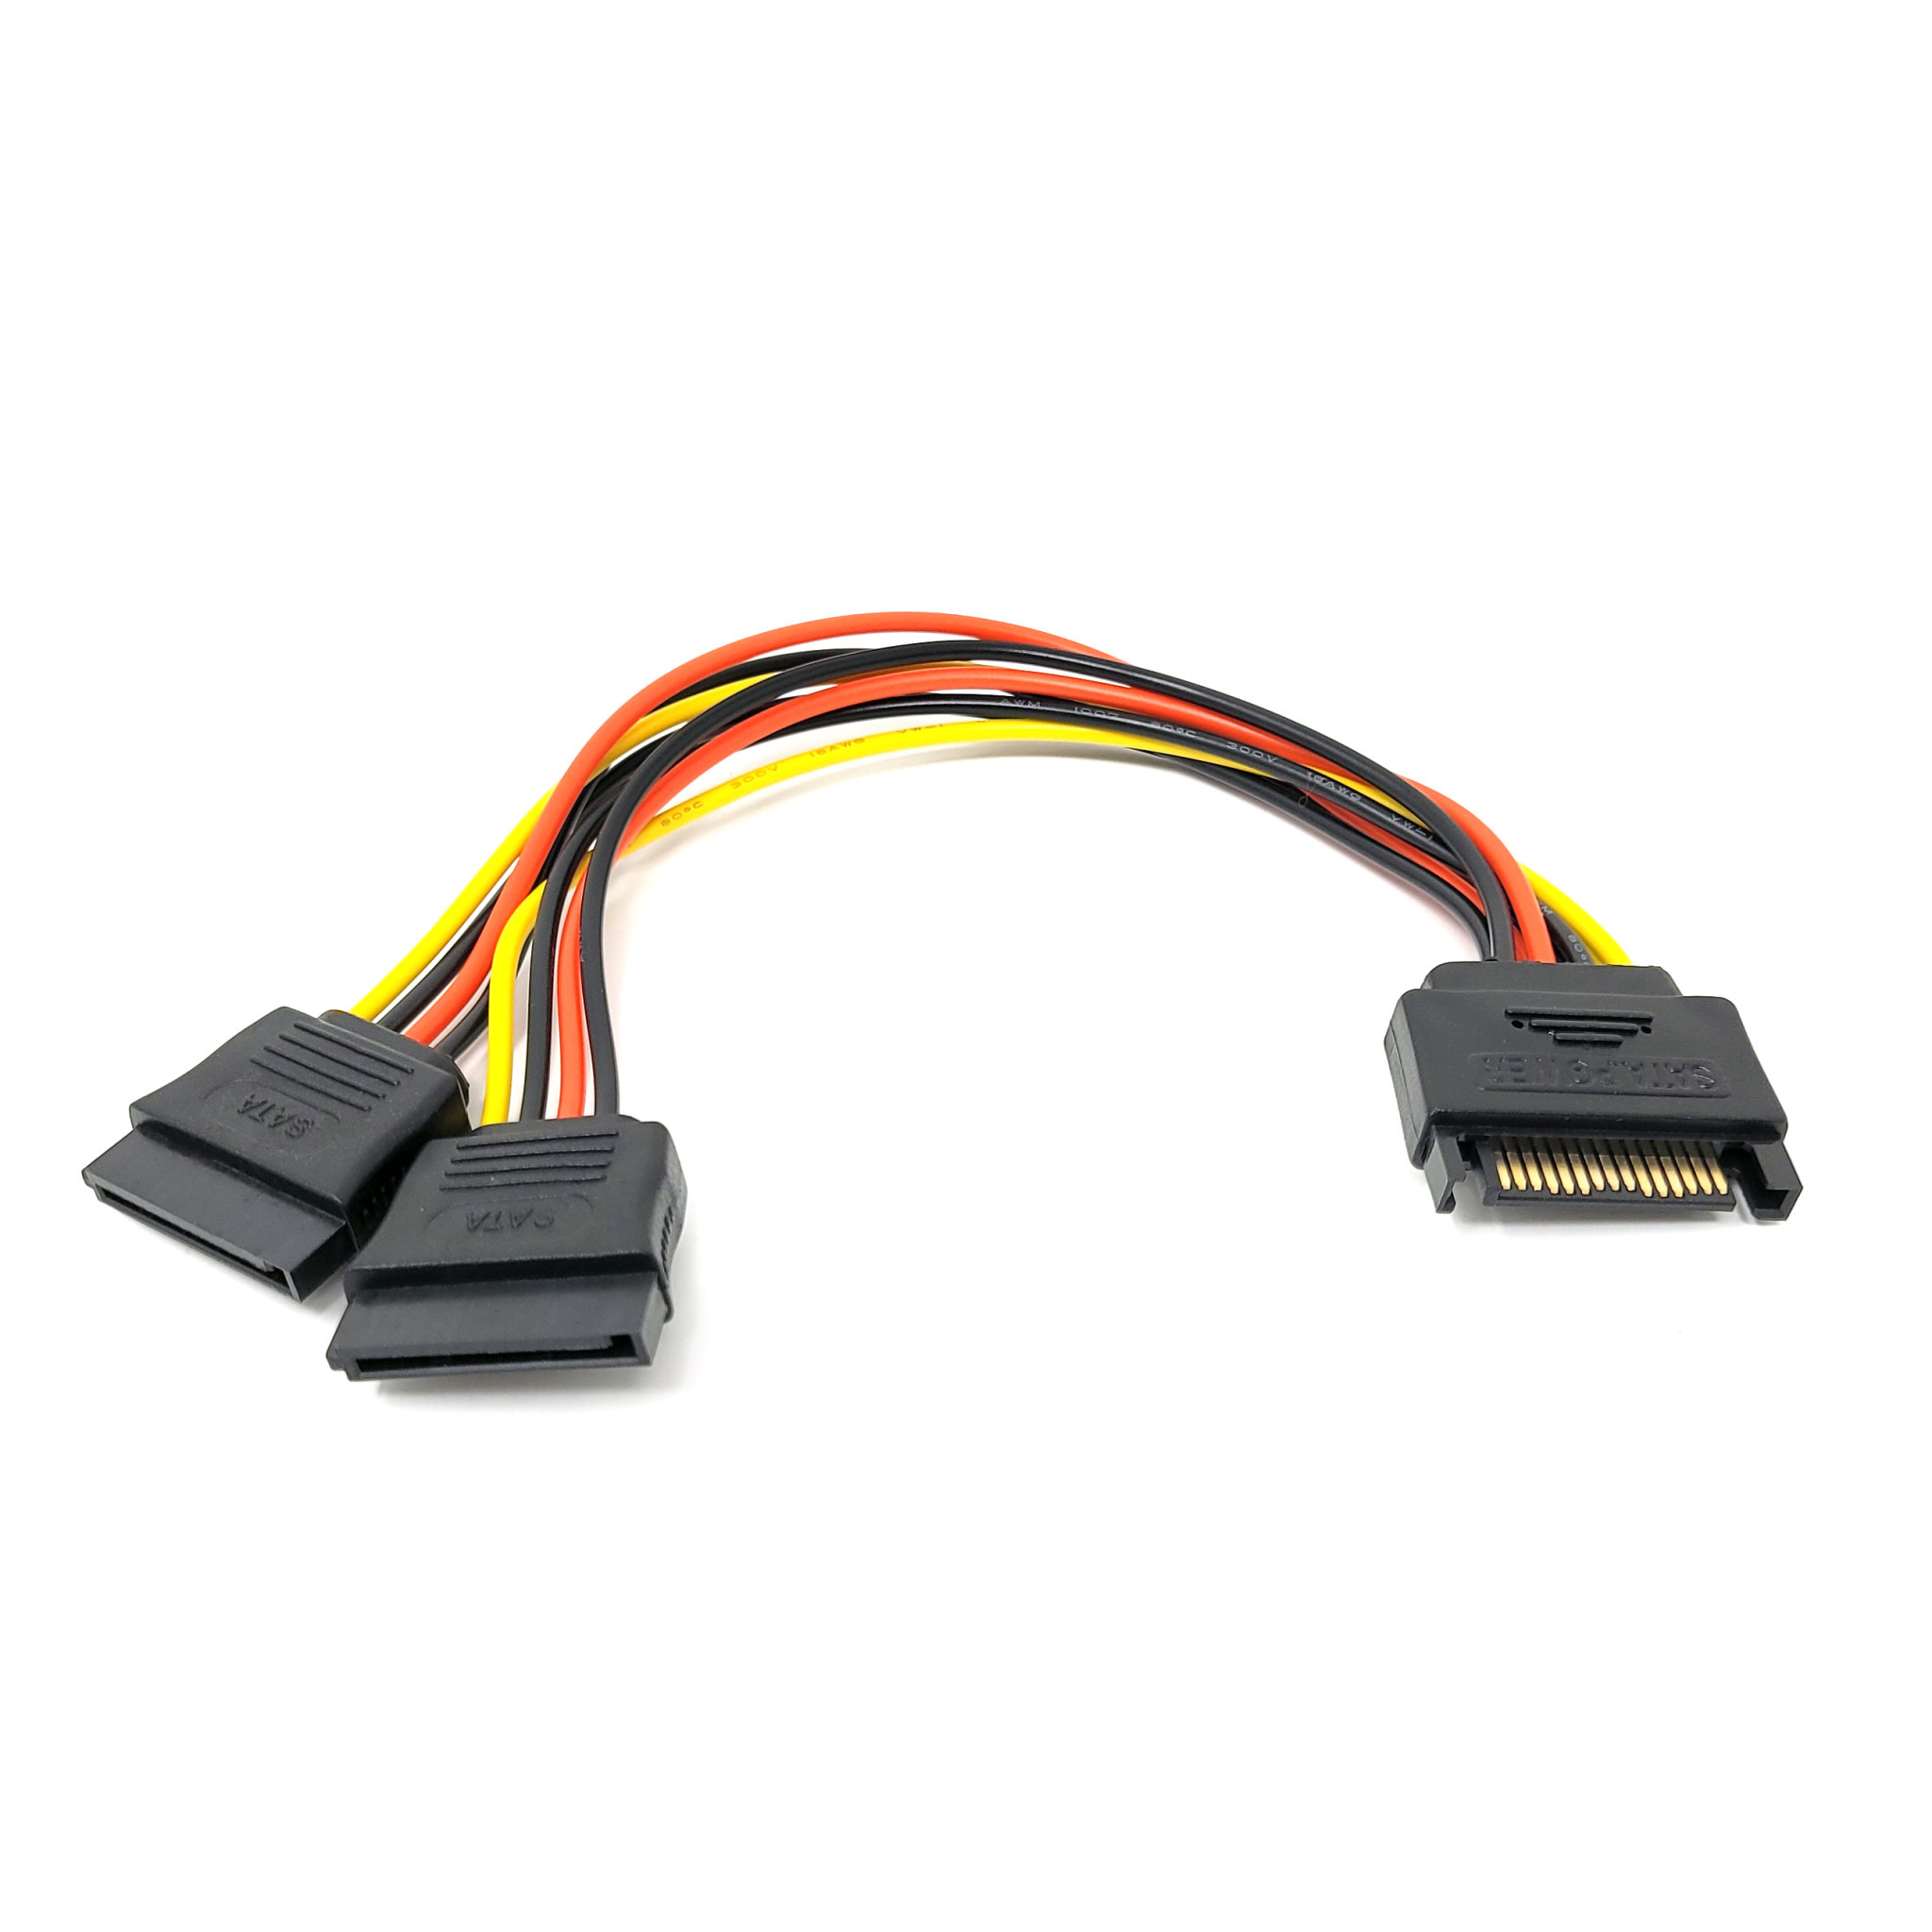 SATA Dual SATA Power Supply Splitter Cable for Hard HDD SSD - NWCA